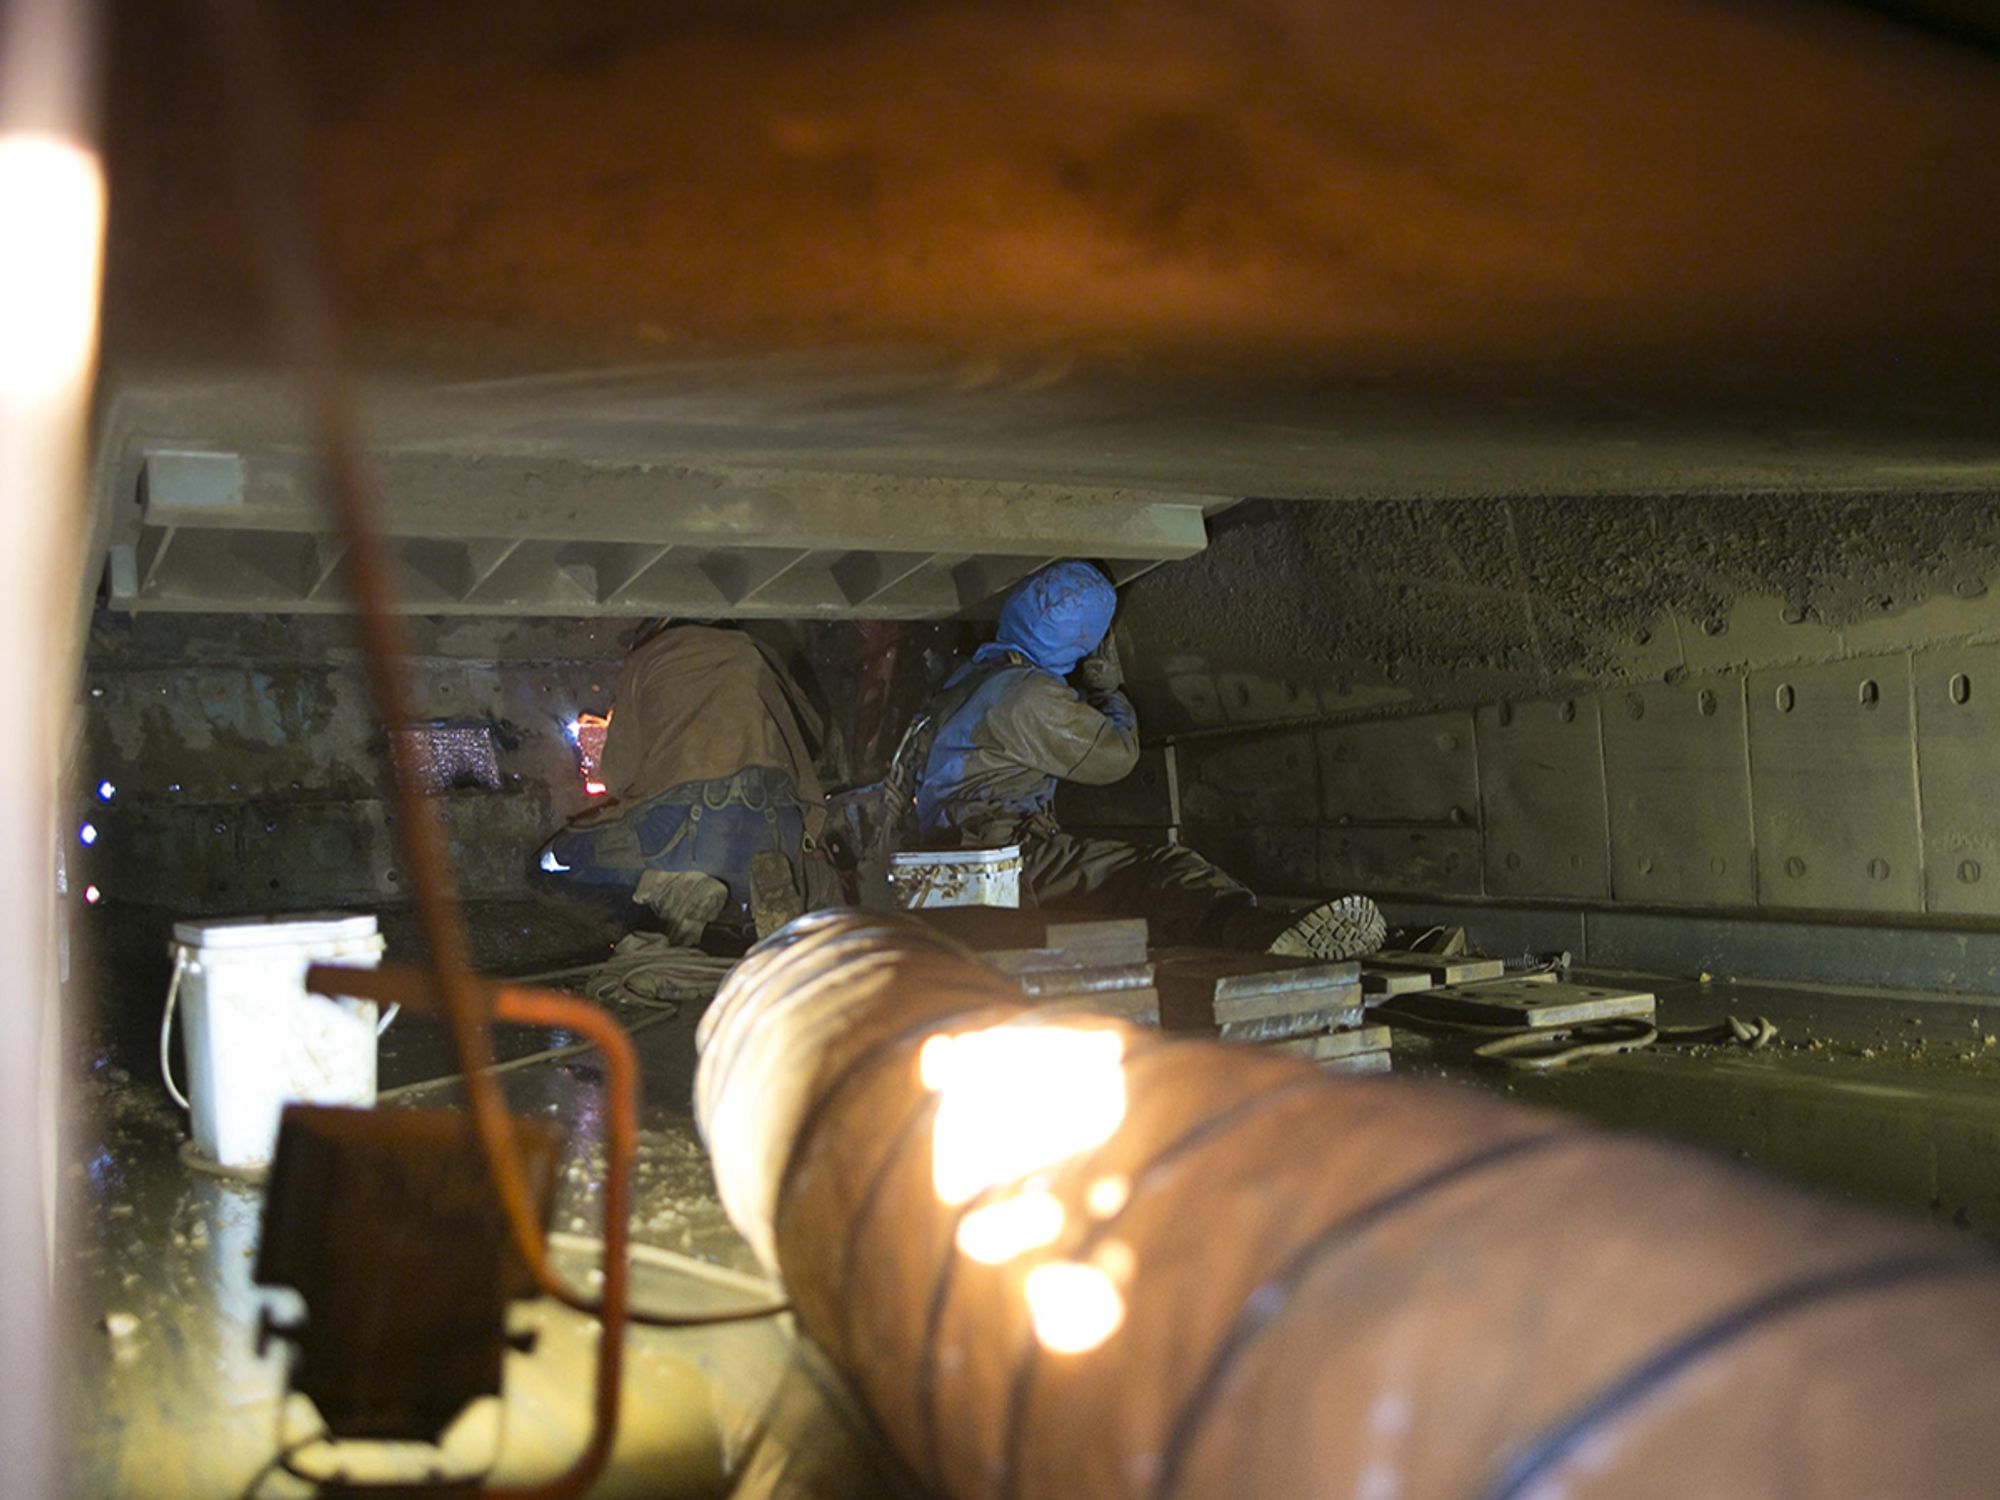 Welding and cutting in confined spaces